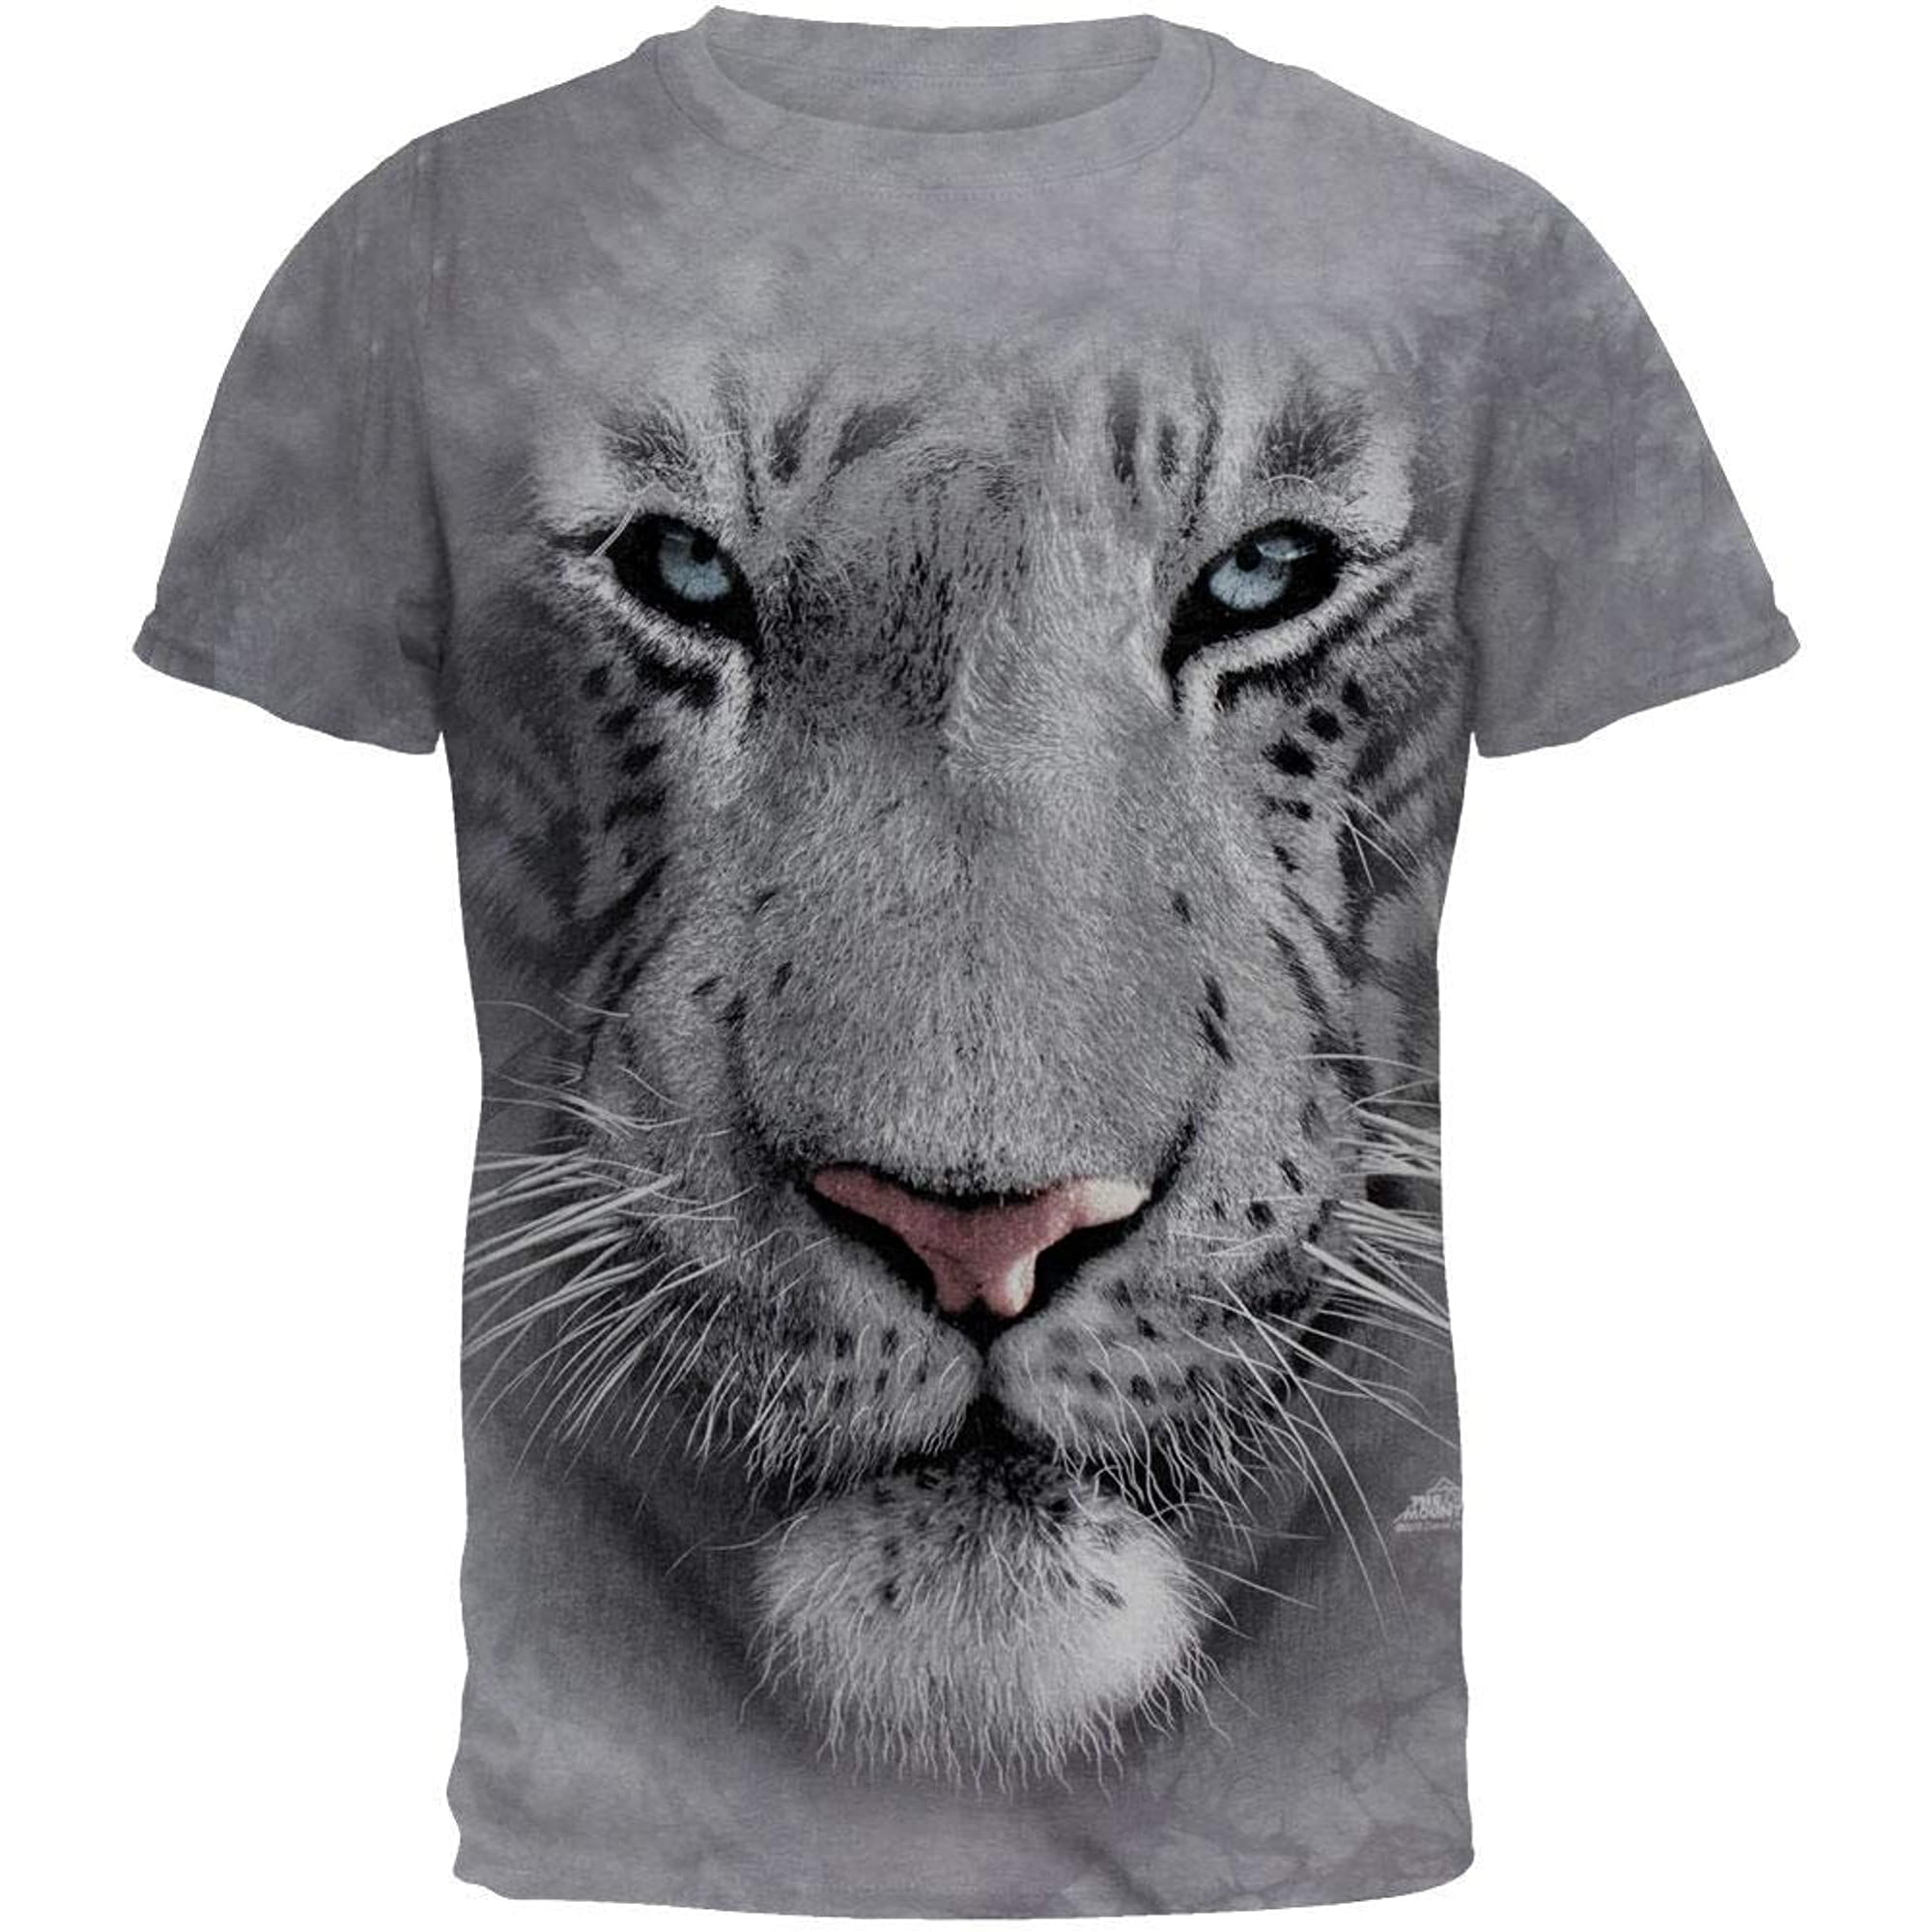 The Mountain White Tiger Face Adult T-Shirt, Grey, Large | Walmart Canada